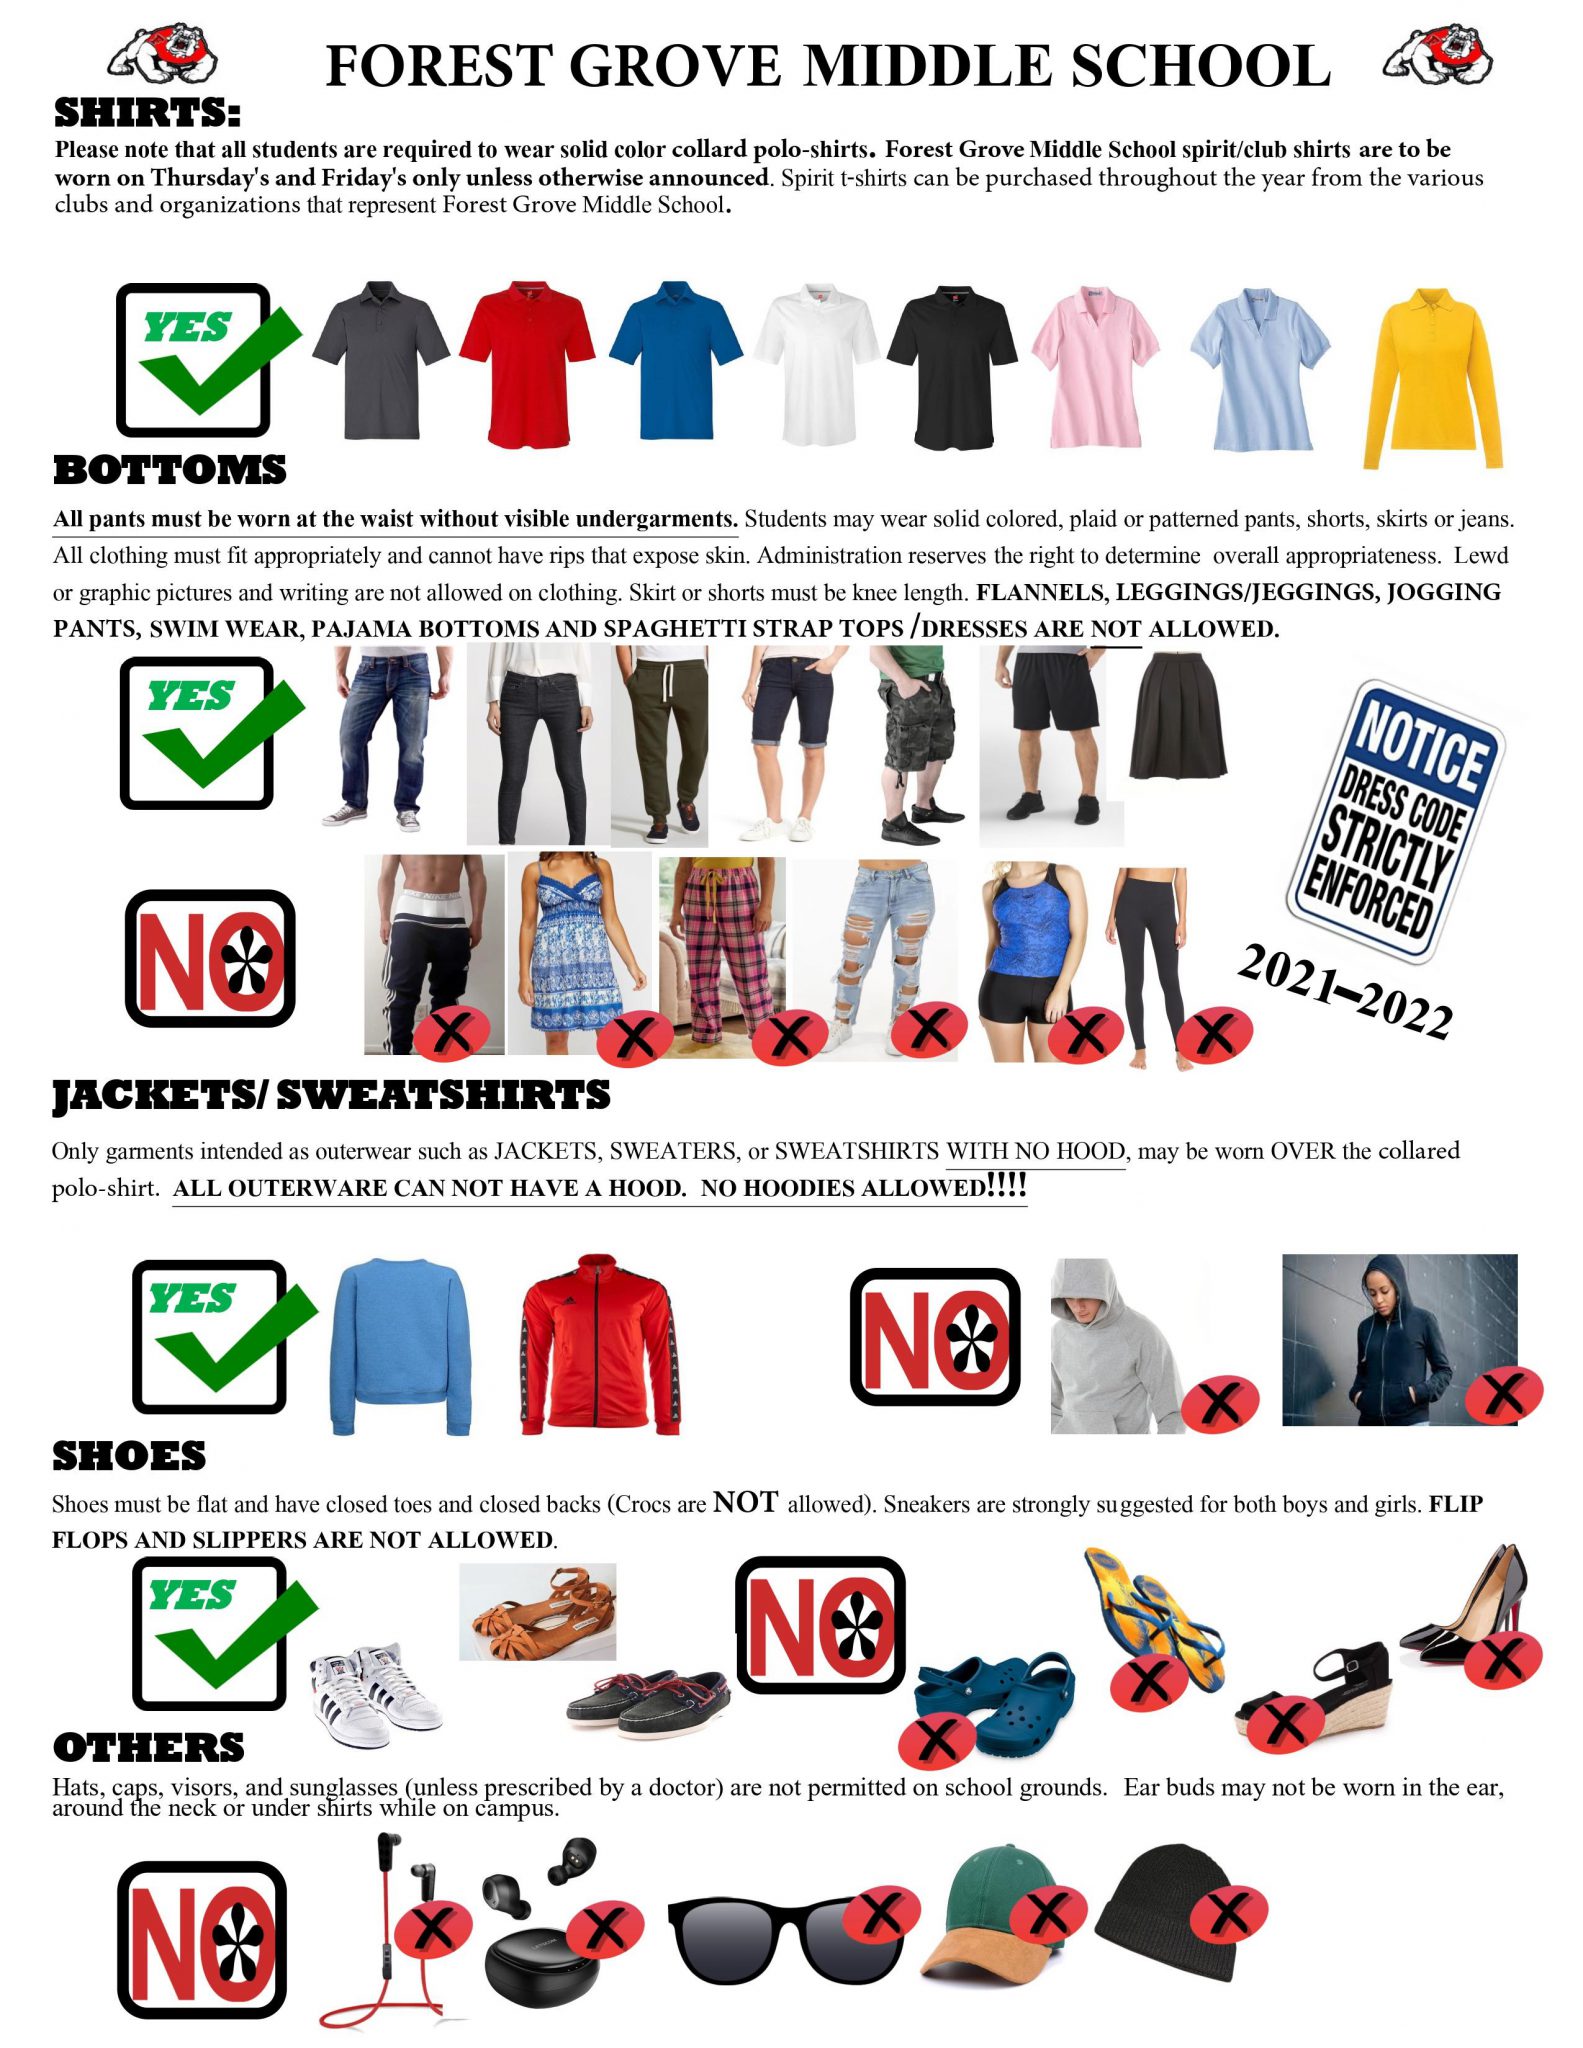 dress-code-forest-grove-middle-school